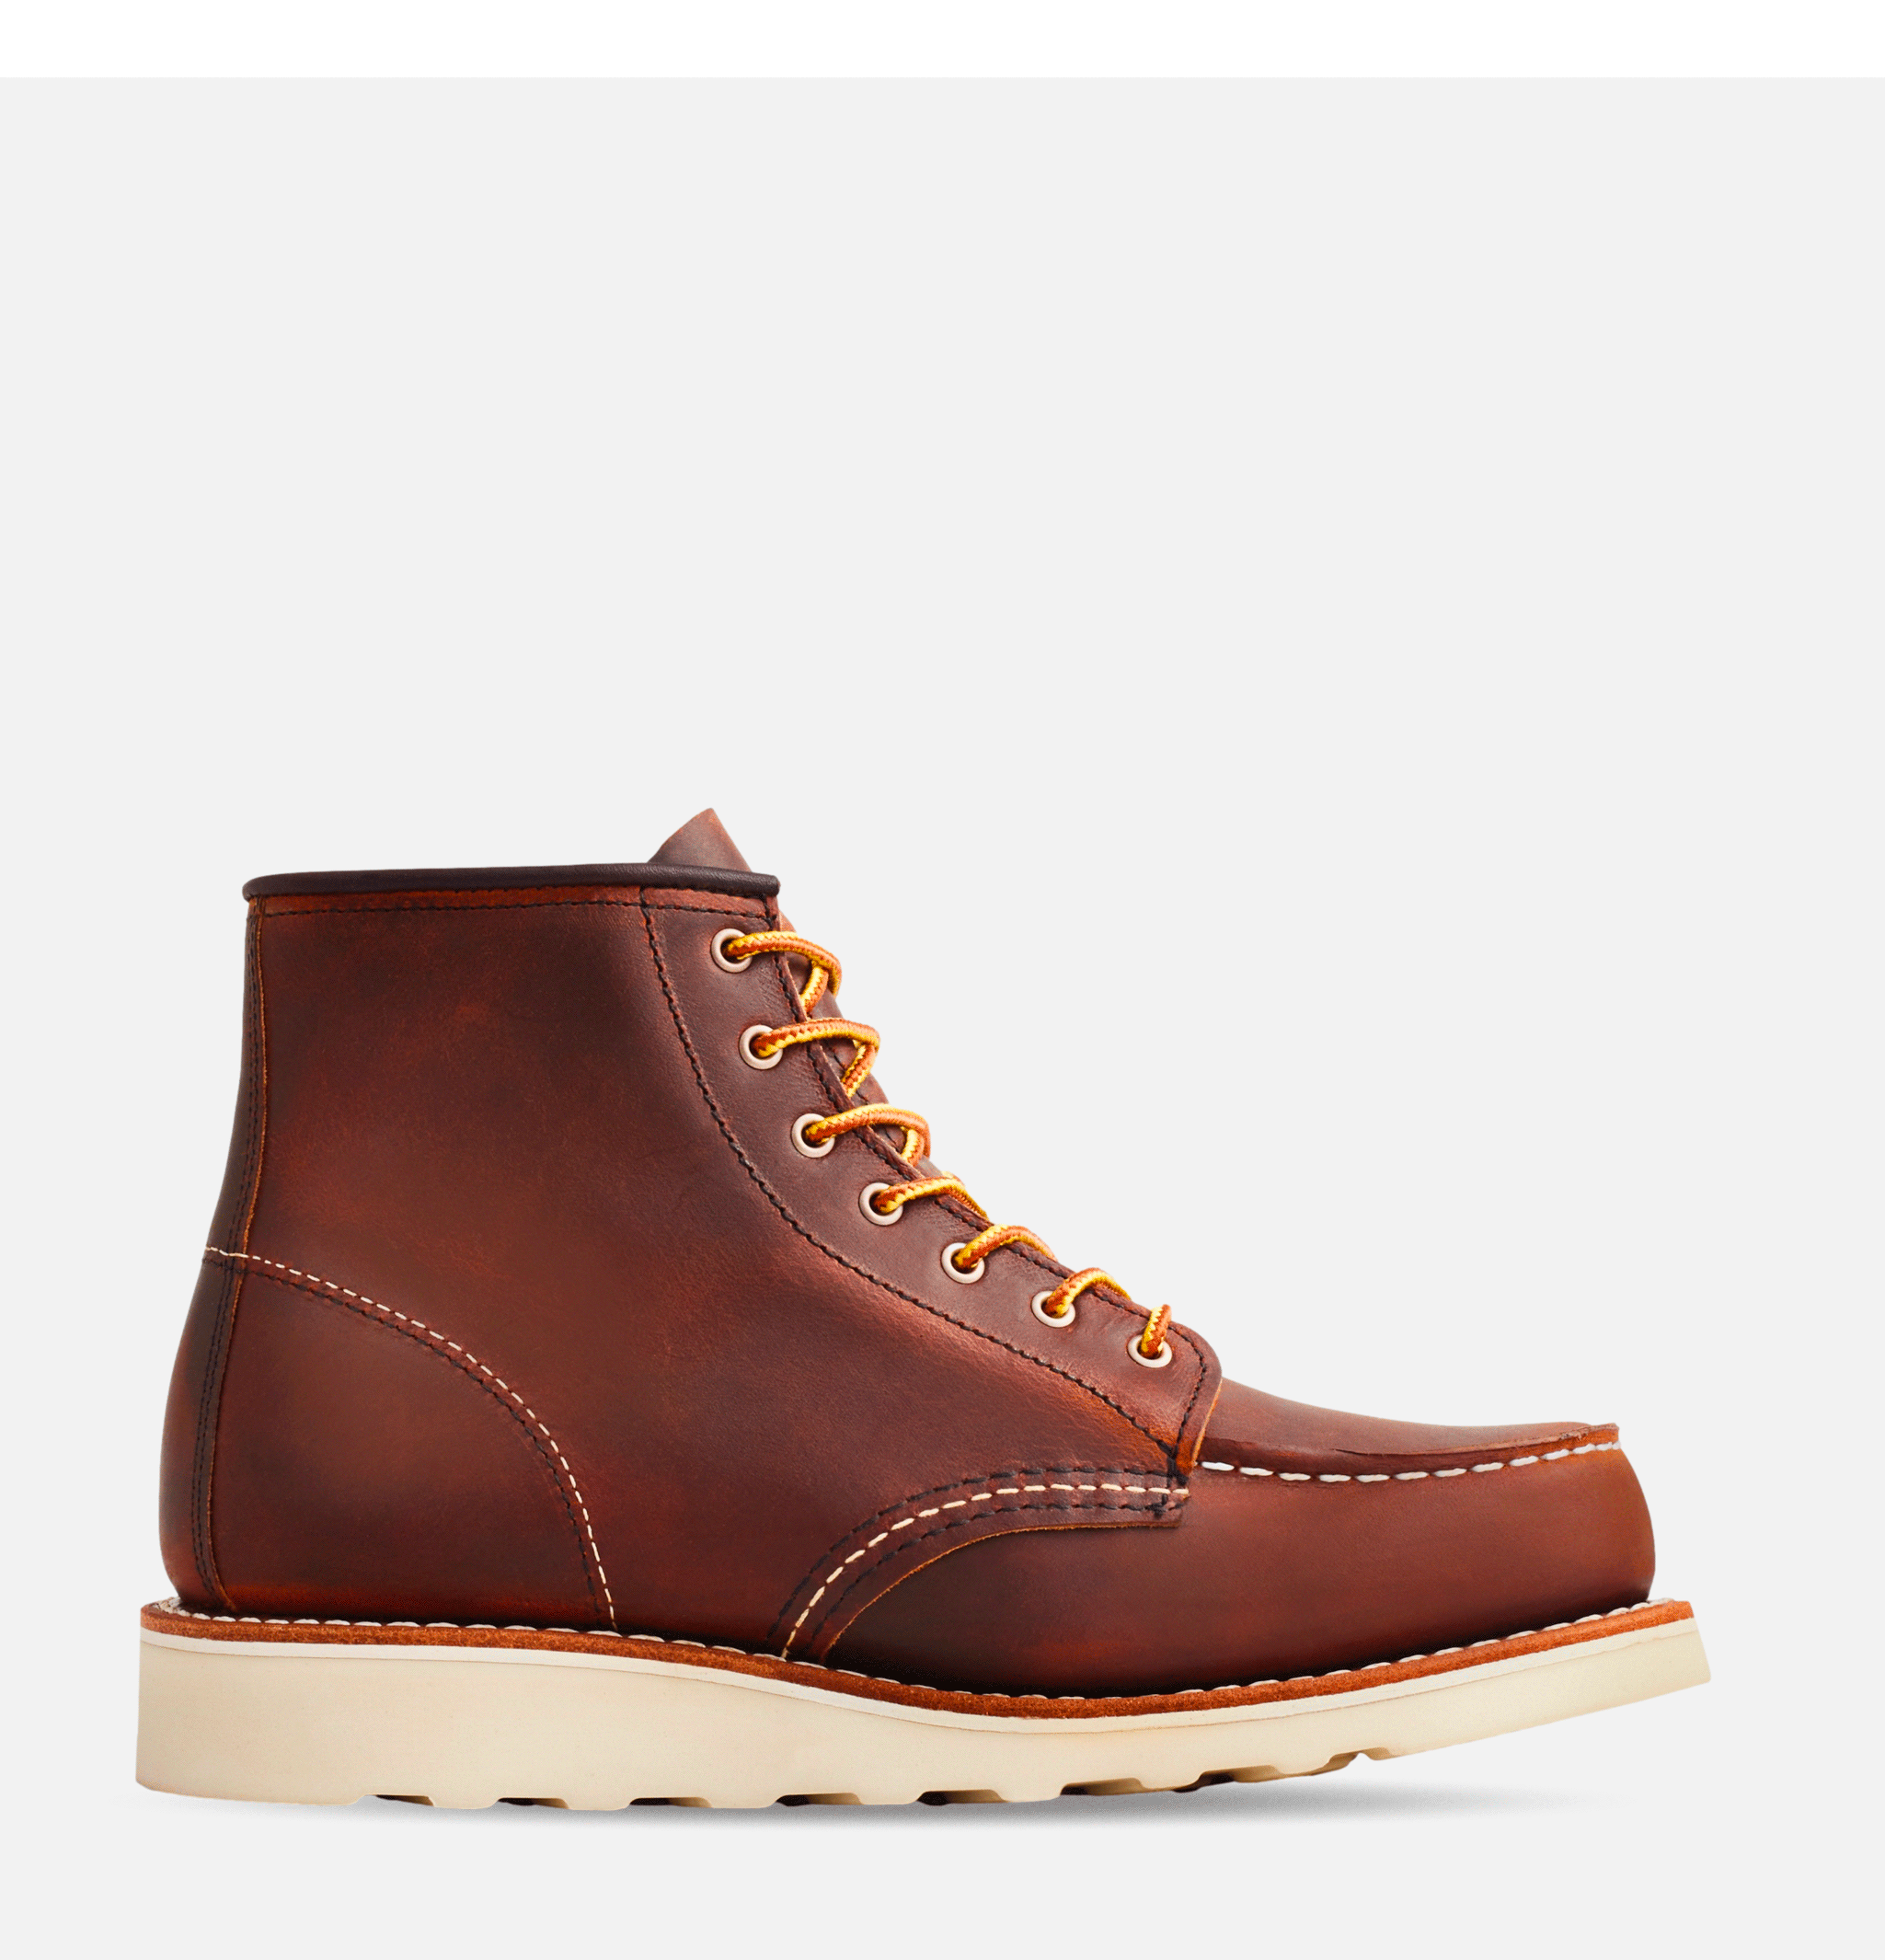 Red Wing Shoes Femme - 3428 - Moc Toe Rough and Tough